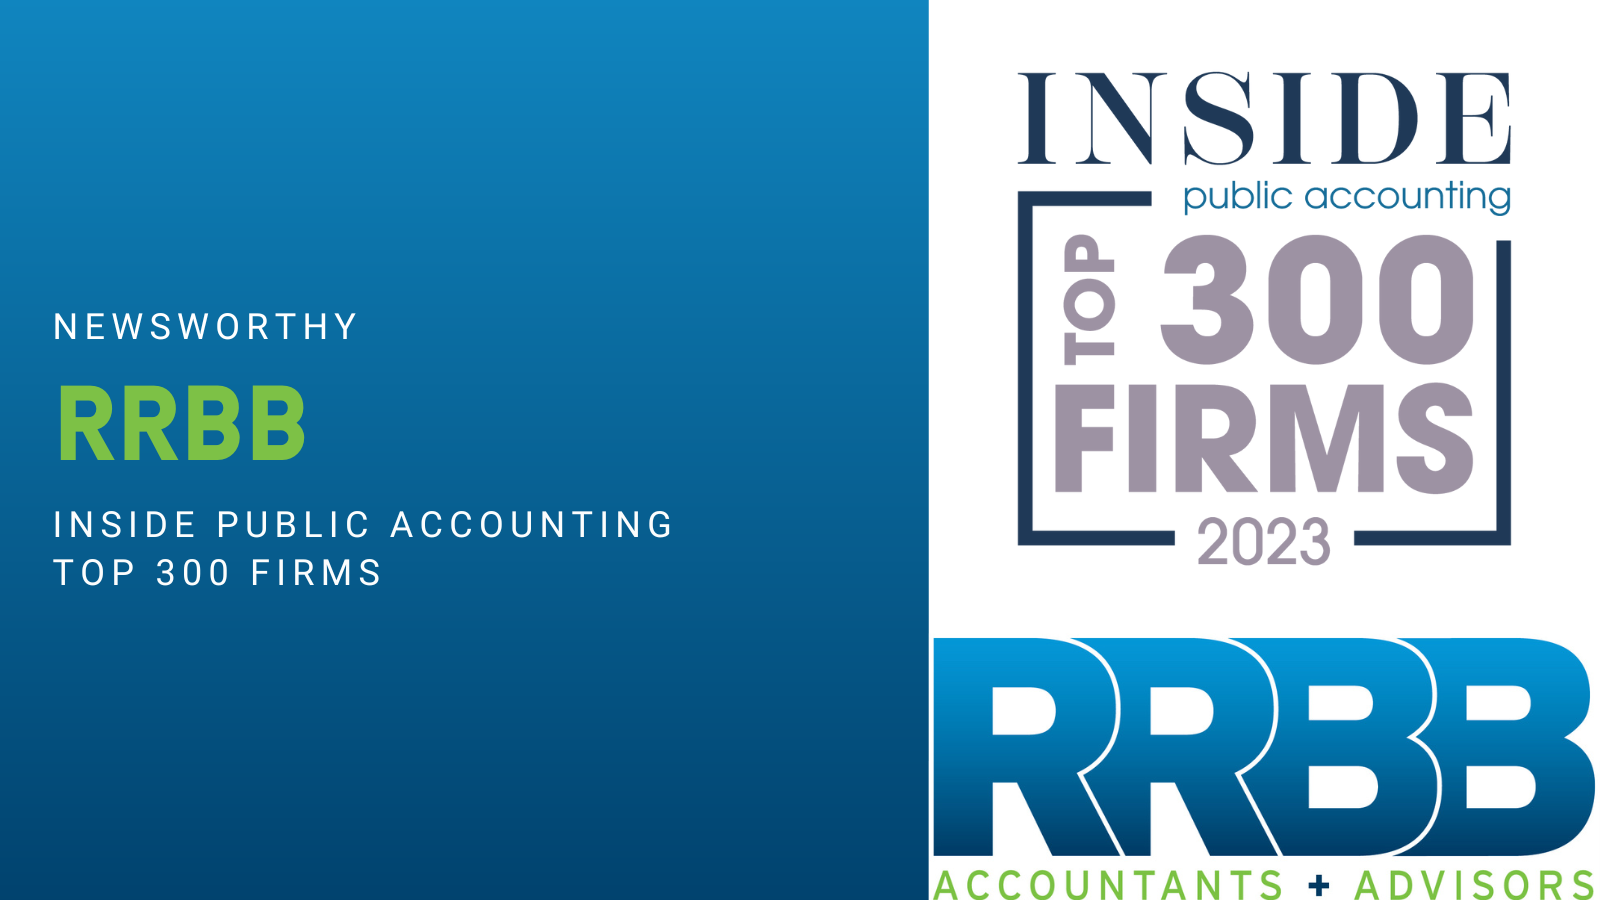 Inside Public Accounting Names RRBB a 2023 Top 300 Accounting Firm Image